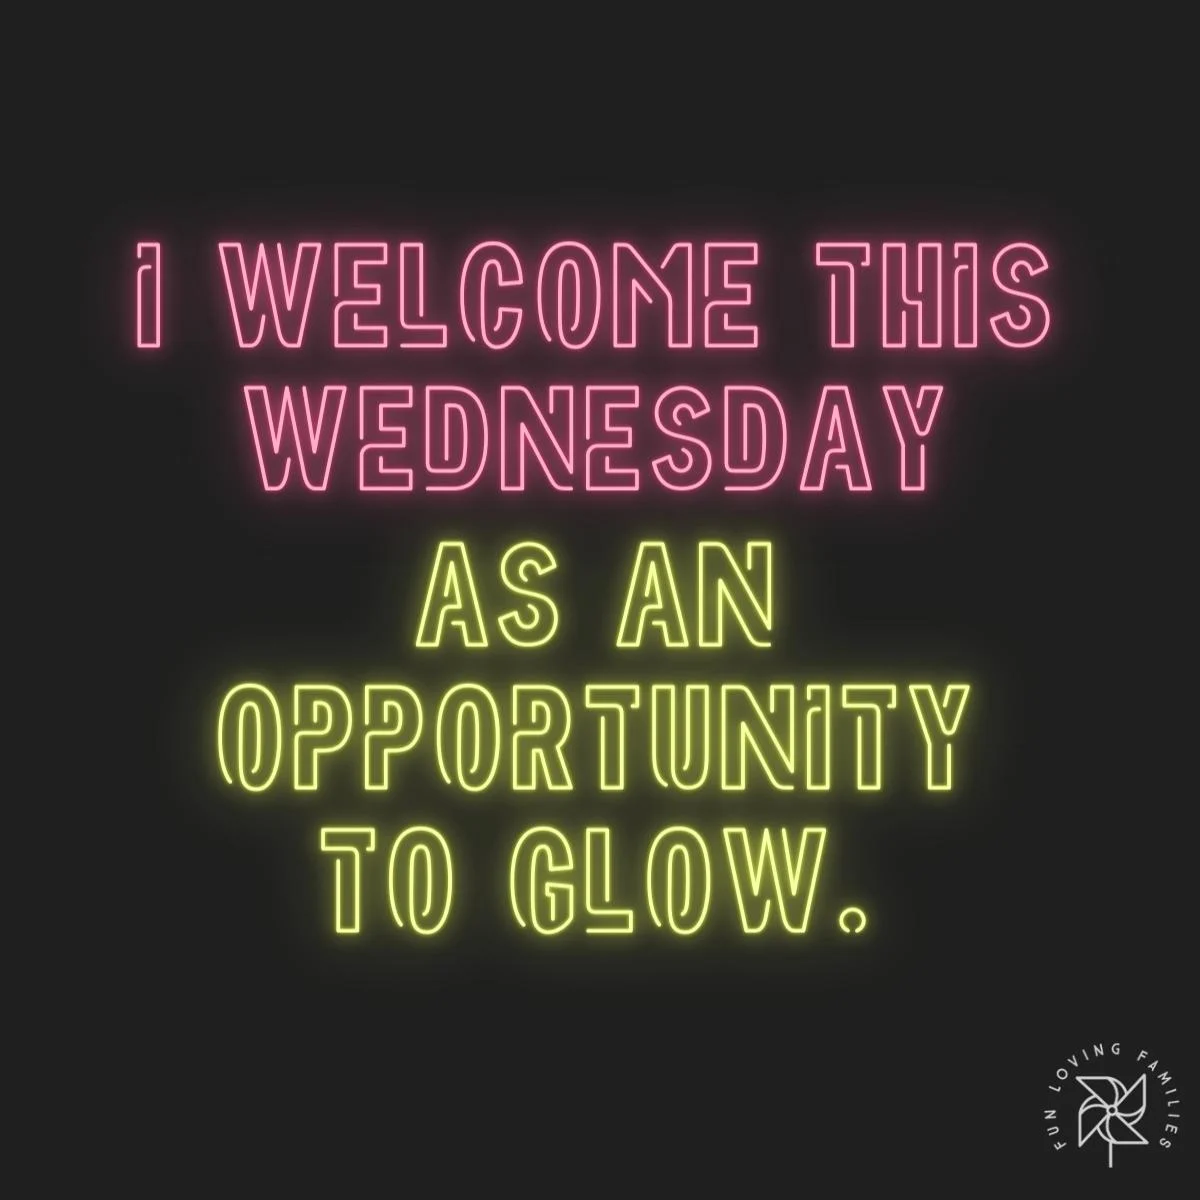 I welcome this Wednesday as an opportunity to glow affirmation image